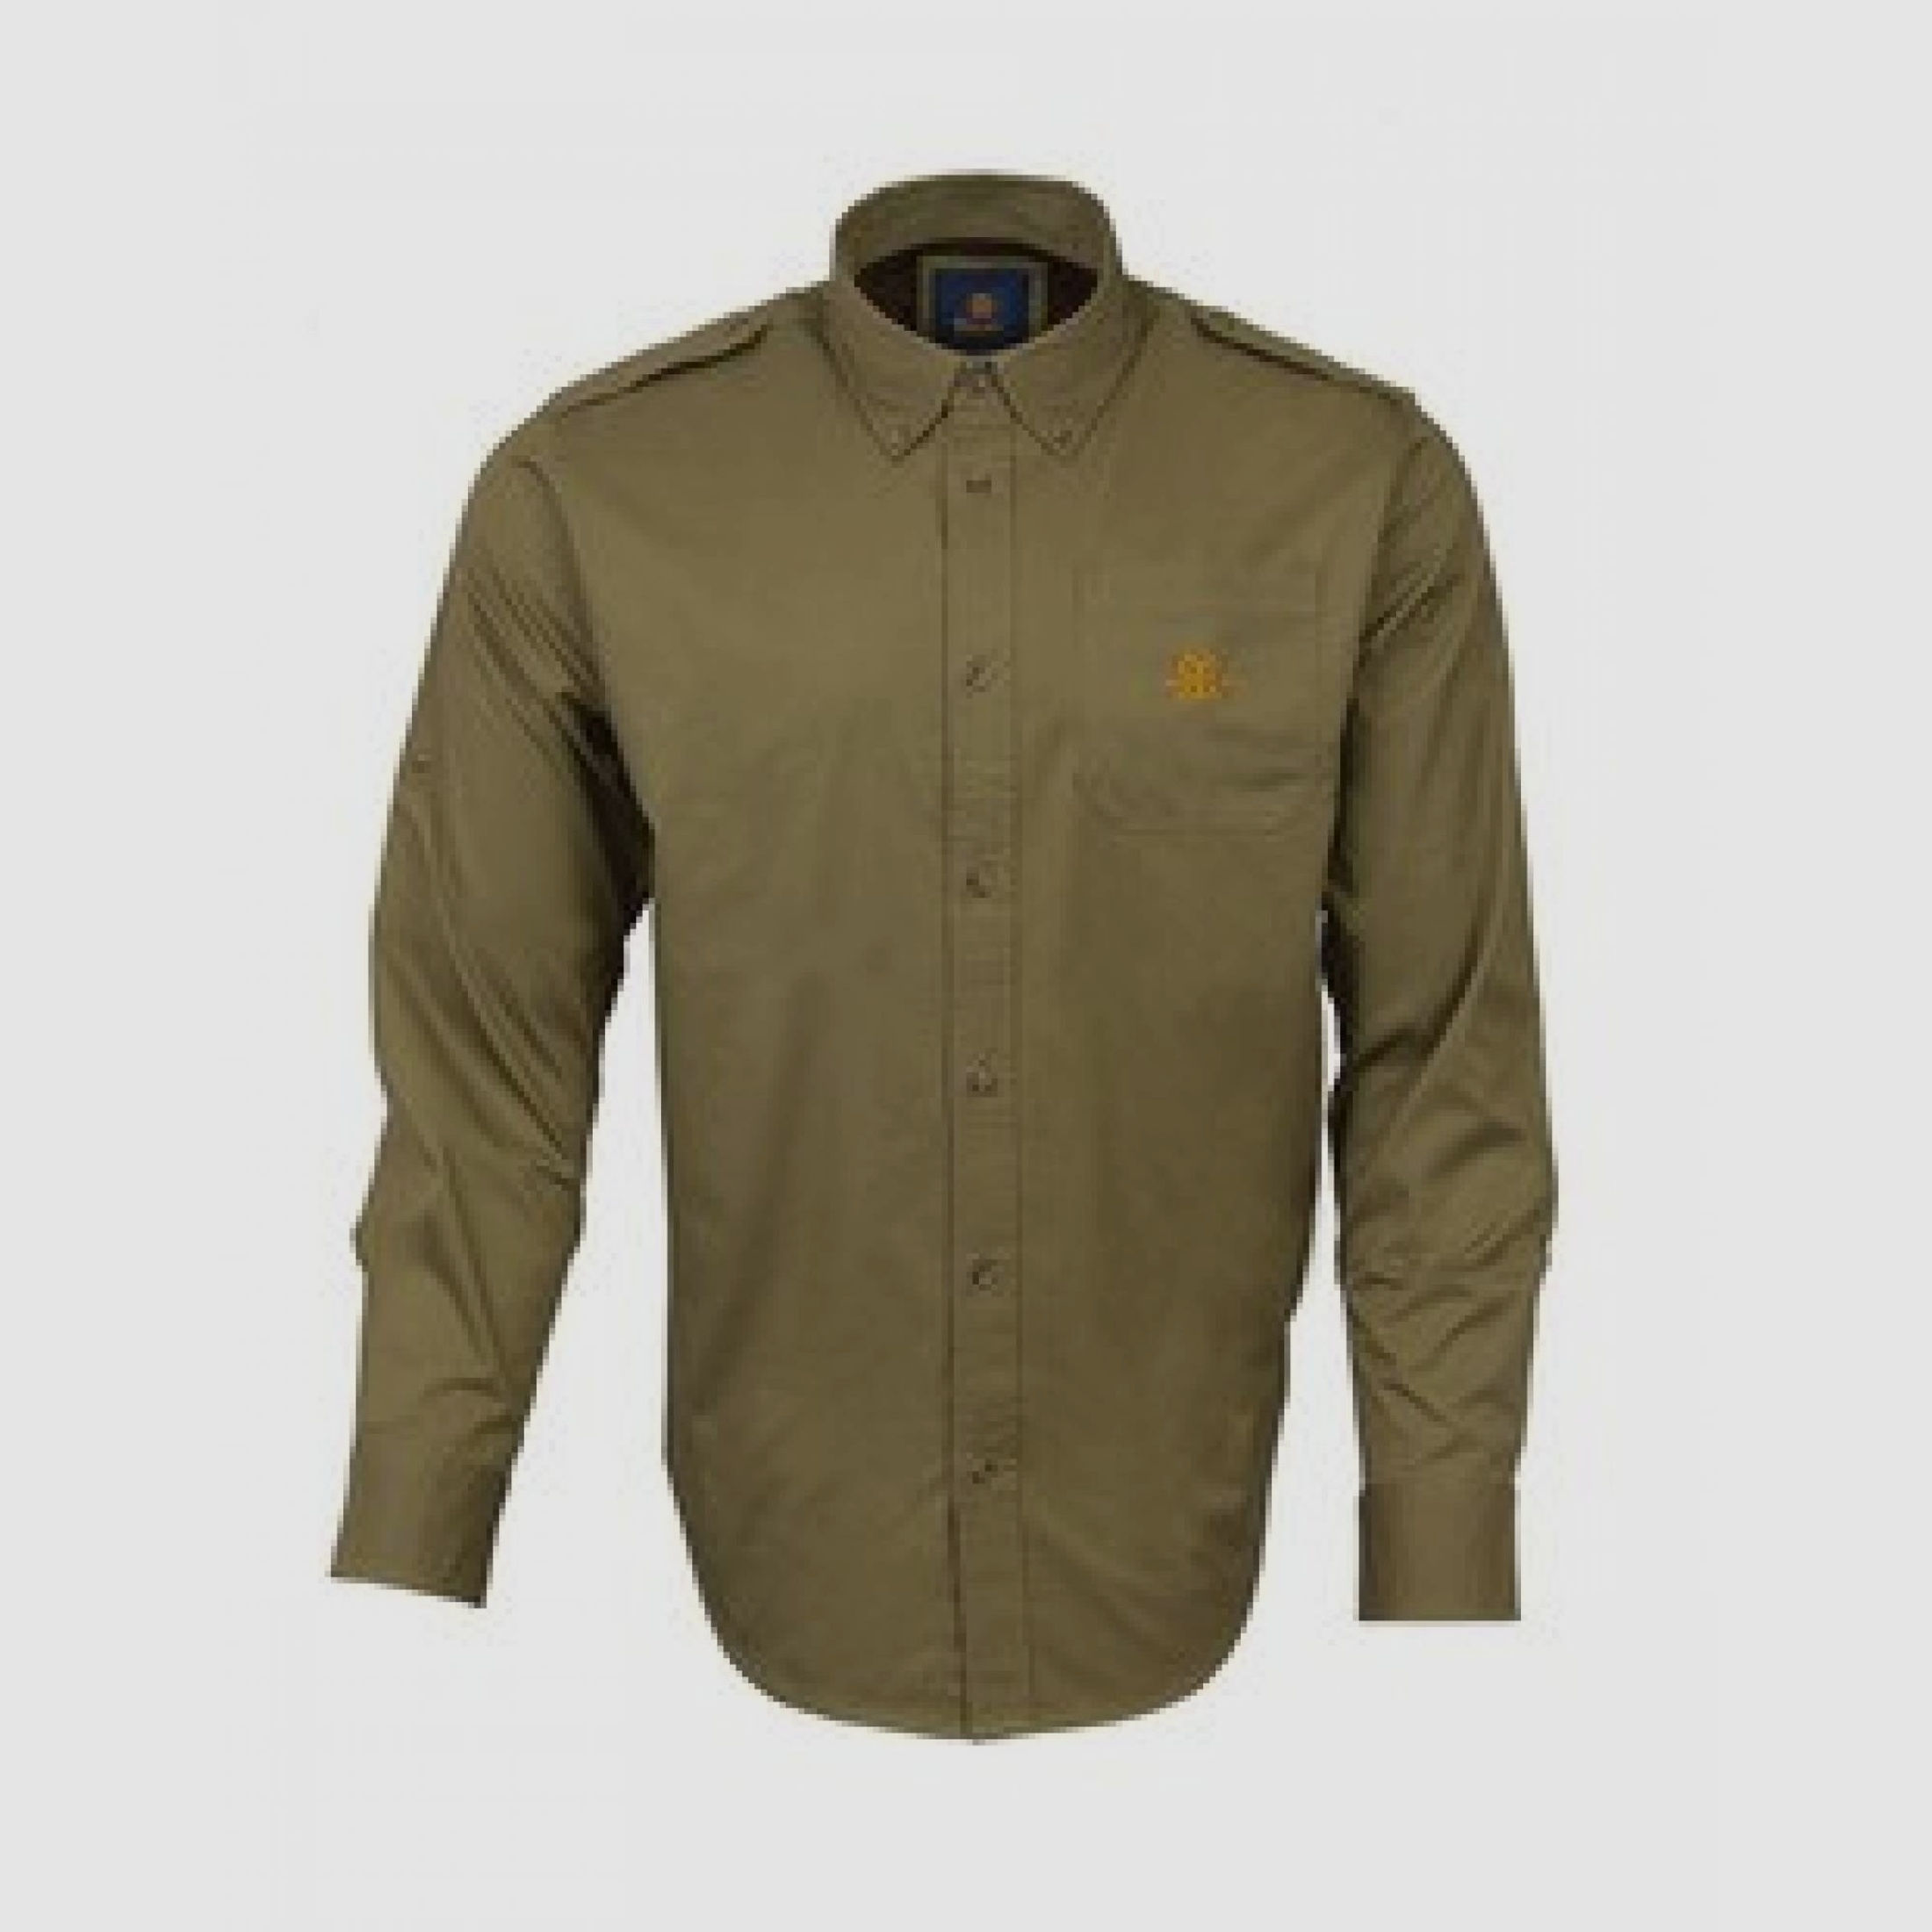 Rigby Classic Hunting Shirt, Olive S